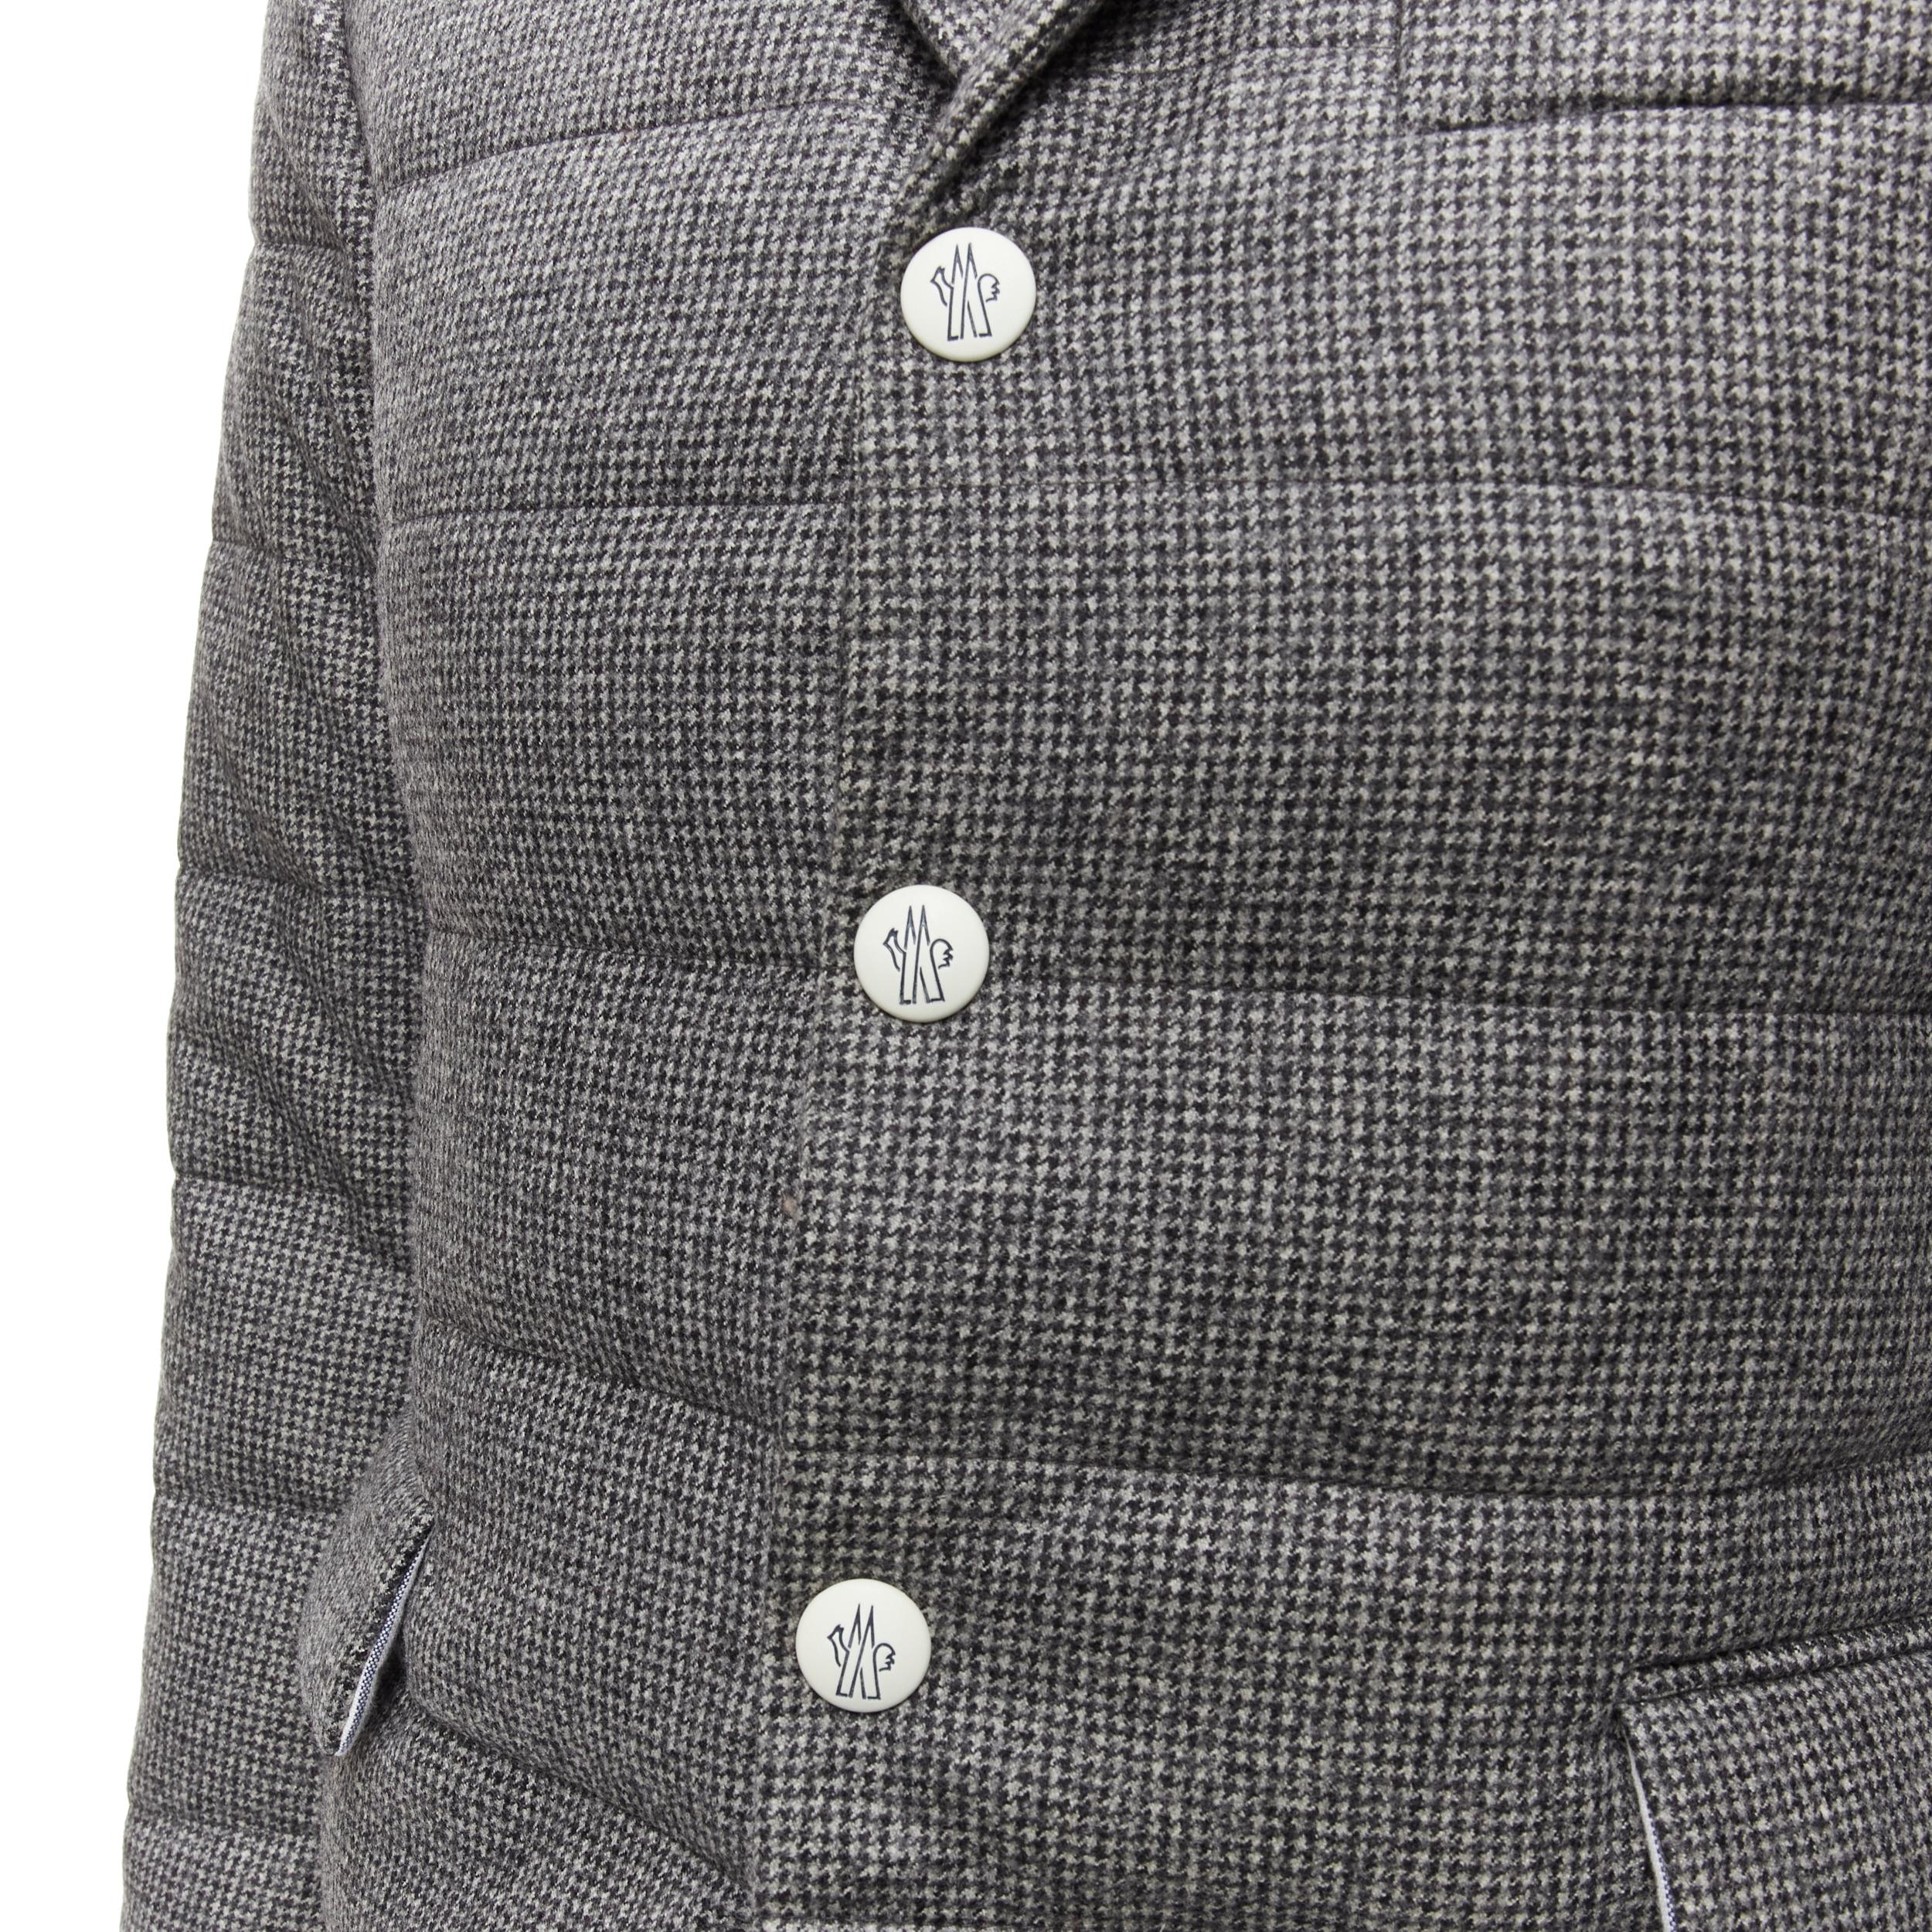 MONCLER GAMME BLEU Thom Browne G32-003 Norme Afnor puffer blazer S
Reference: BMPA/A00237
Brand: Moncler
Designer: Thom Browne
Material: Wool, Cashmere
Color: Grey
Pattern: Houndstooth
Closure: Snap Buttons
Lining: Fabric
Extra Details: Signature